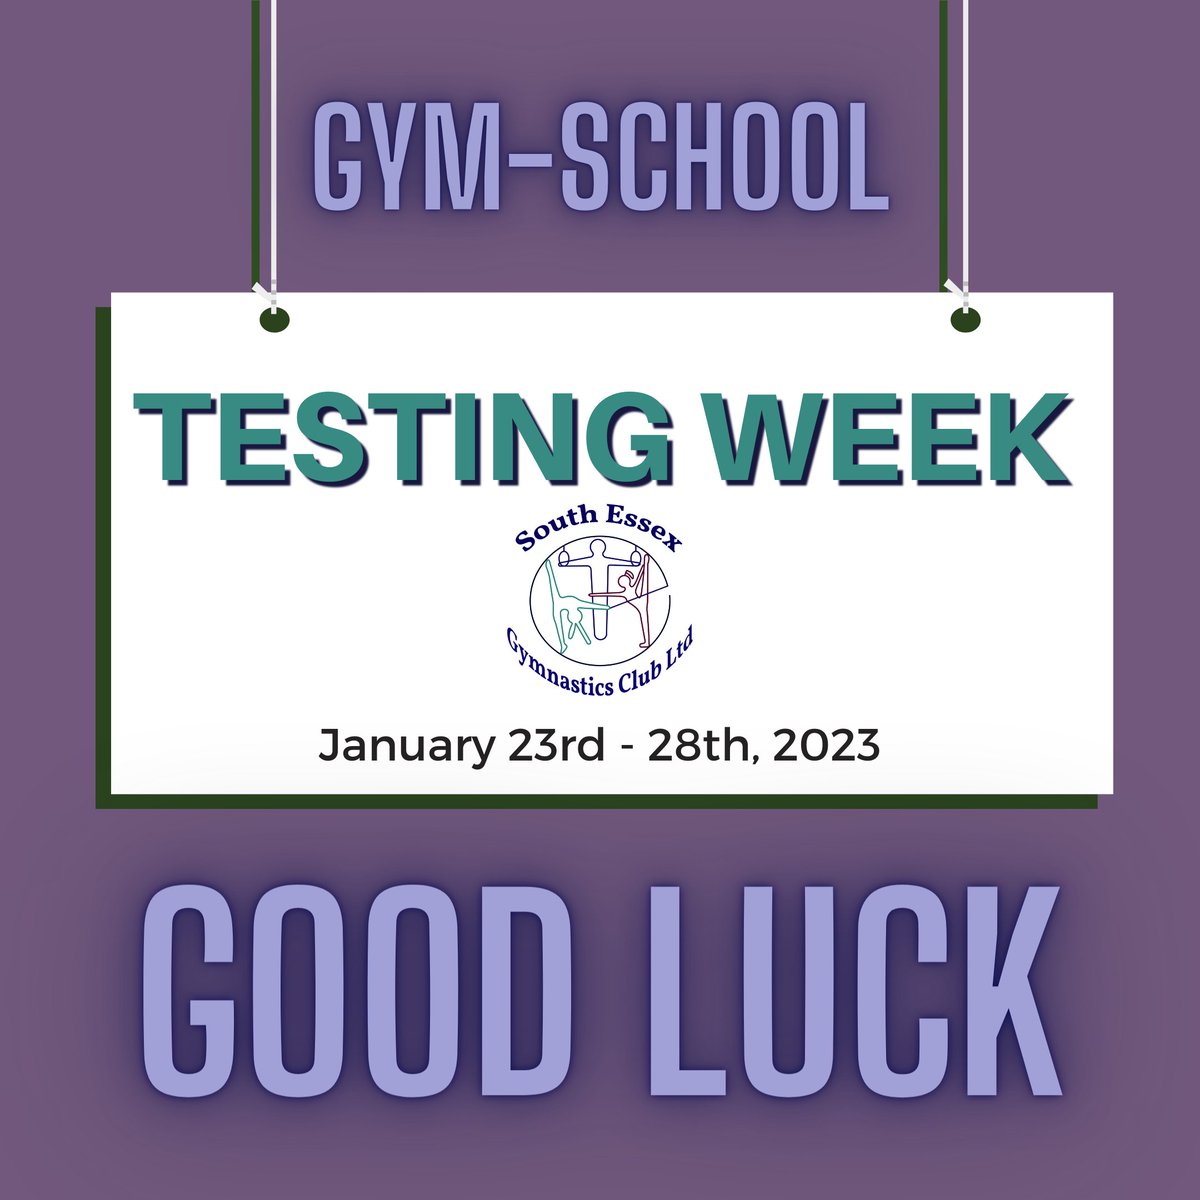 Gym-school testing week has begun! Good luck to all the gymnasts testing and we cannot wait to see how you do! #segc #sounthessexgymnasticsclub #southessexgym #southessexgymclub #gymschool